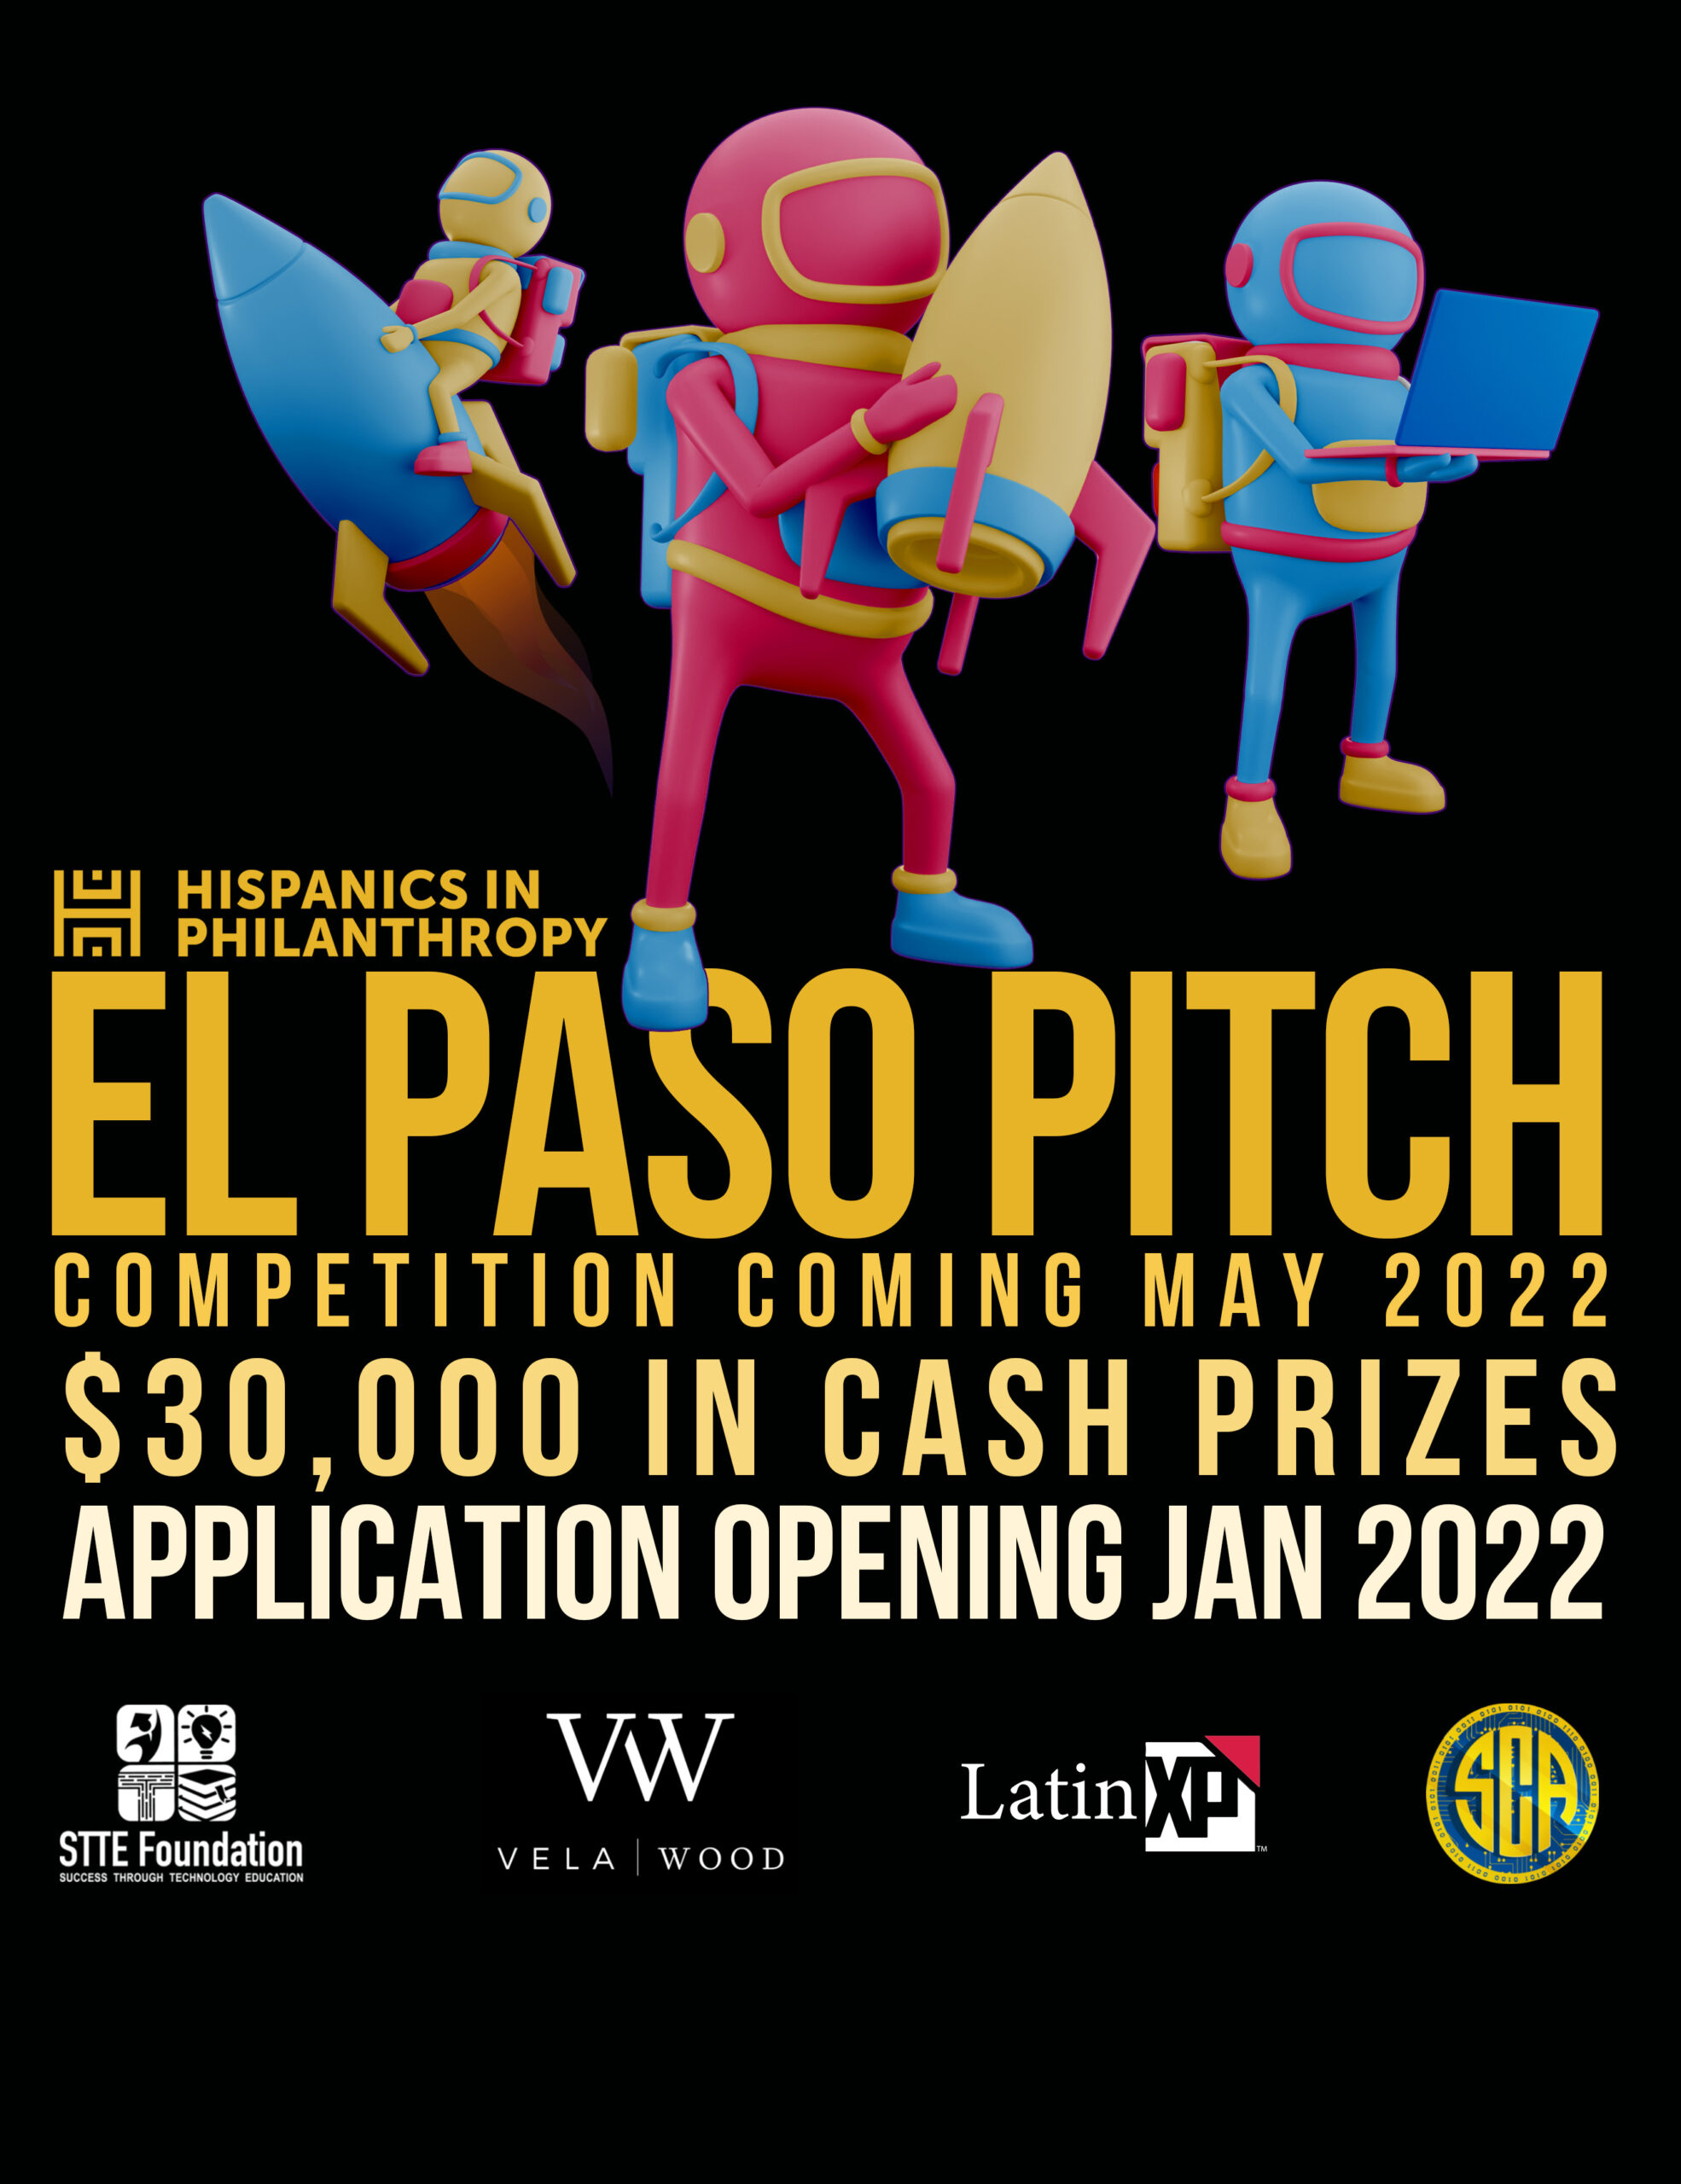 EL PASO PITCH STARTUP COMPETITION